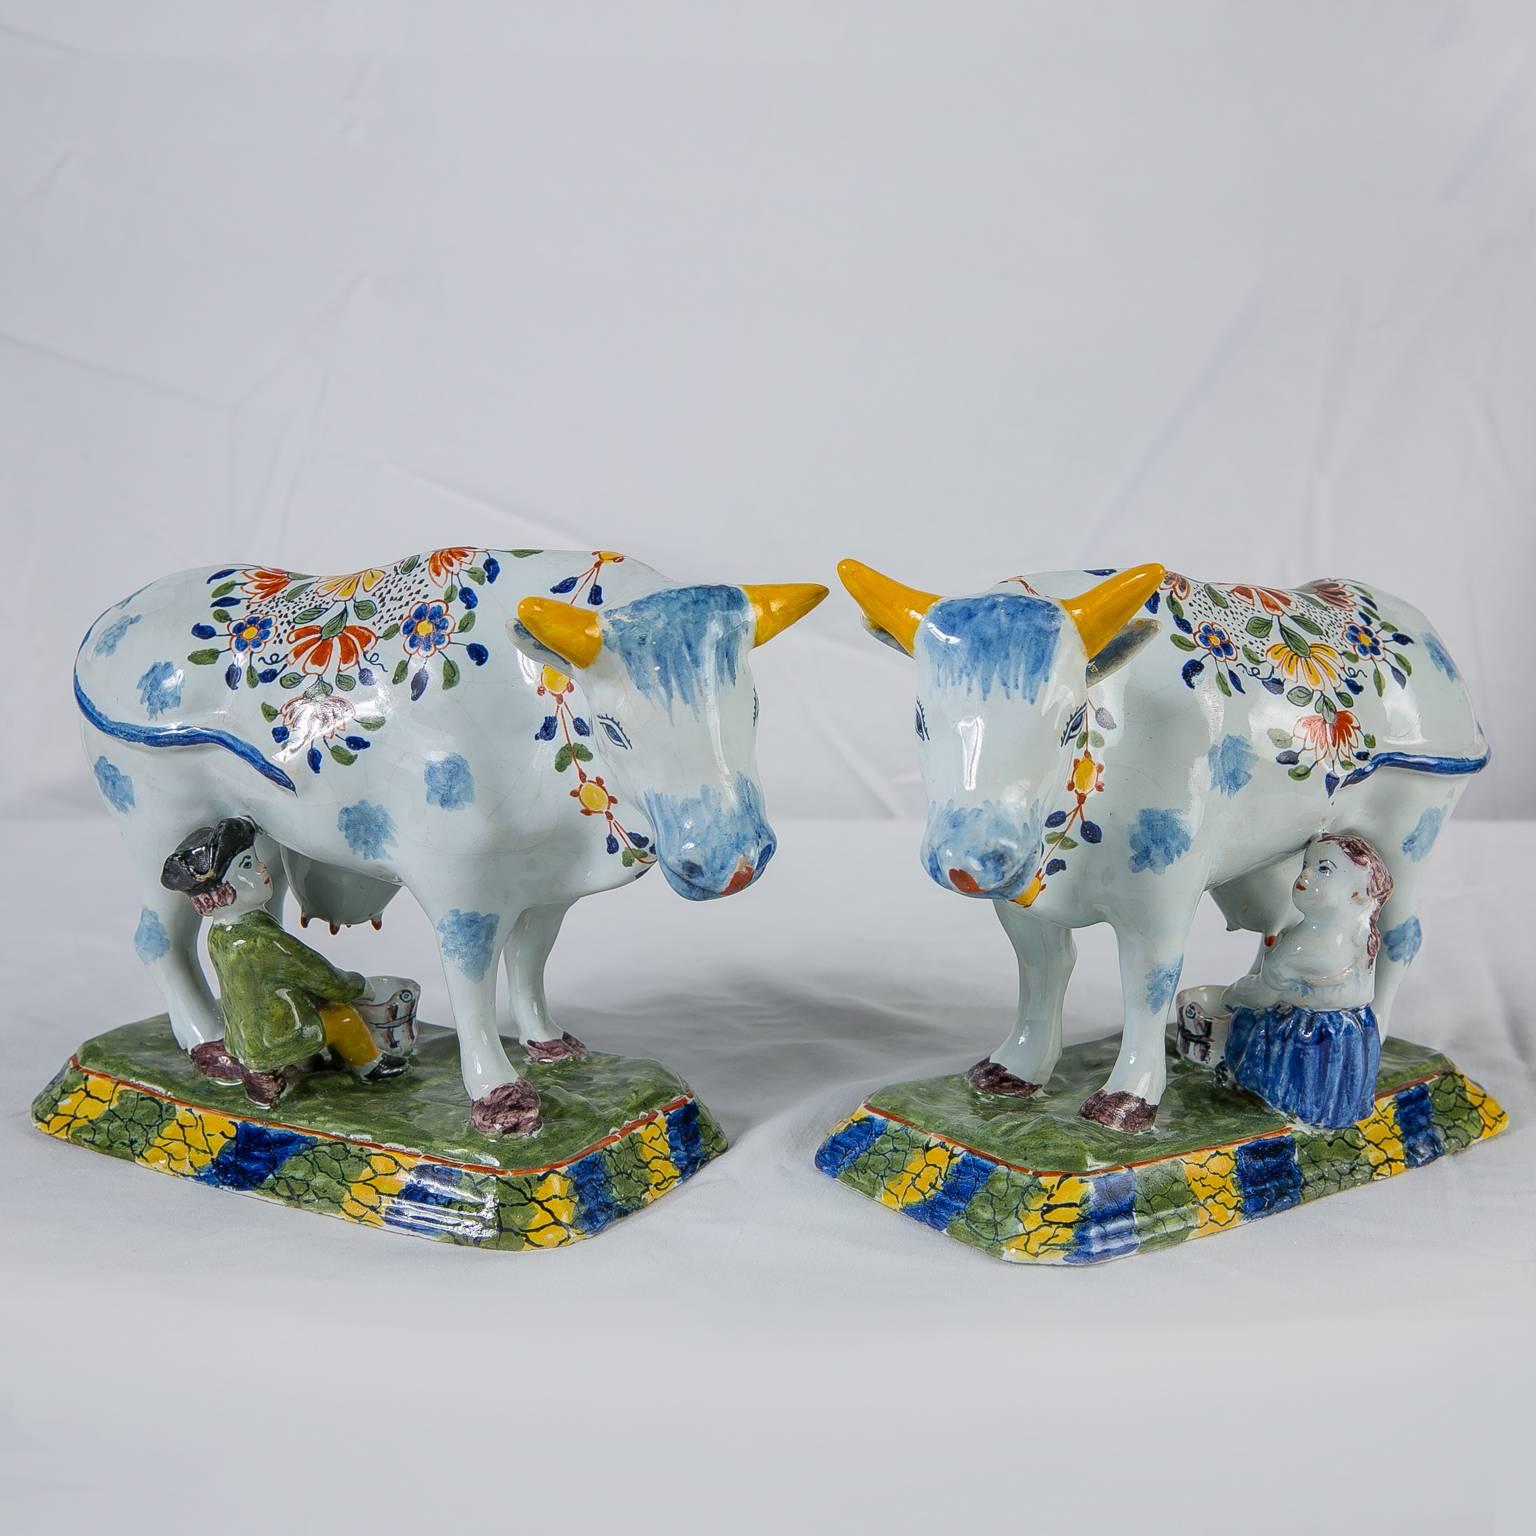 A pair of Dutch Delft cows painted in bright polychrome colors of blue, orange, yellow and green.
This is a wonderful pair of Delft cows each with a seated boy or milkmaid milking.
 The back of each cow is covered with lovely painted flowers. A